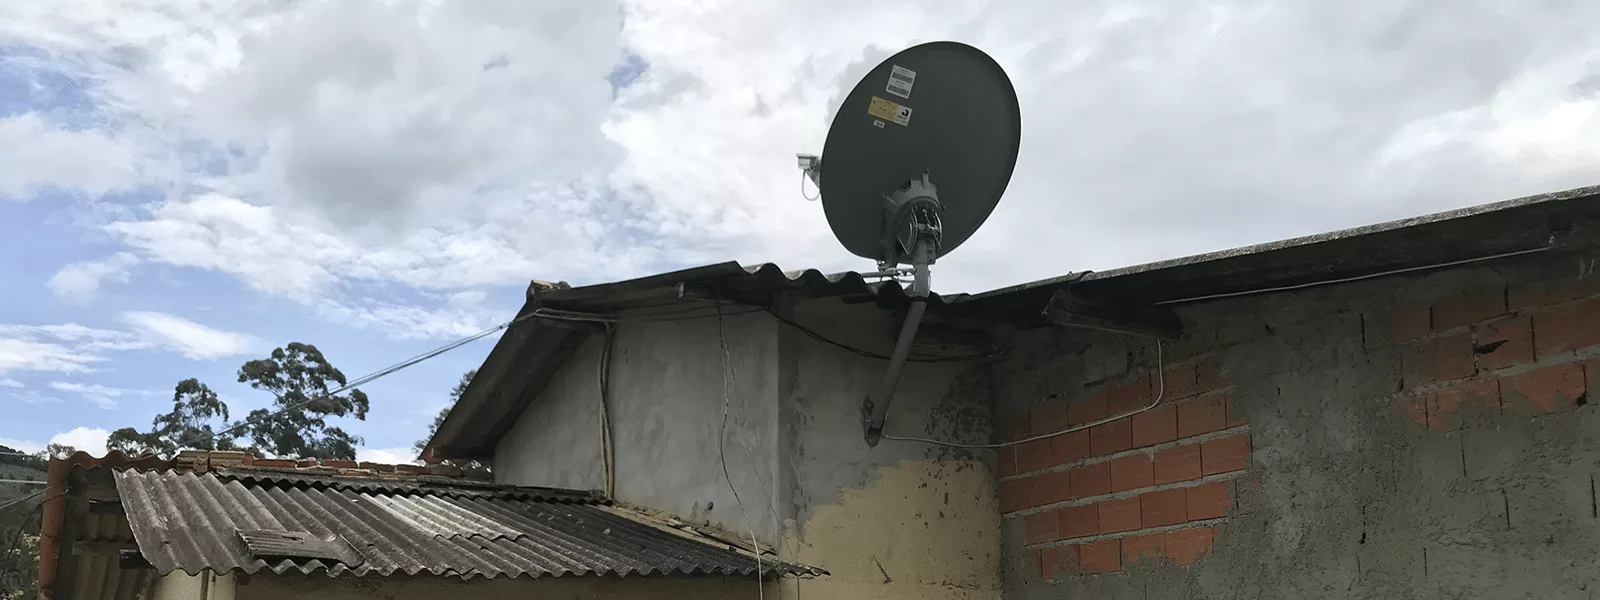 Satellite on house in Mexico